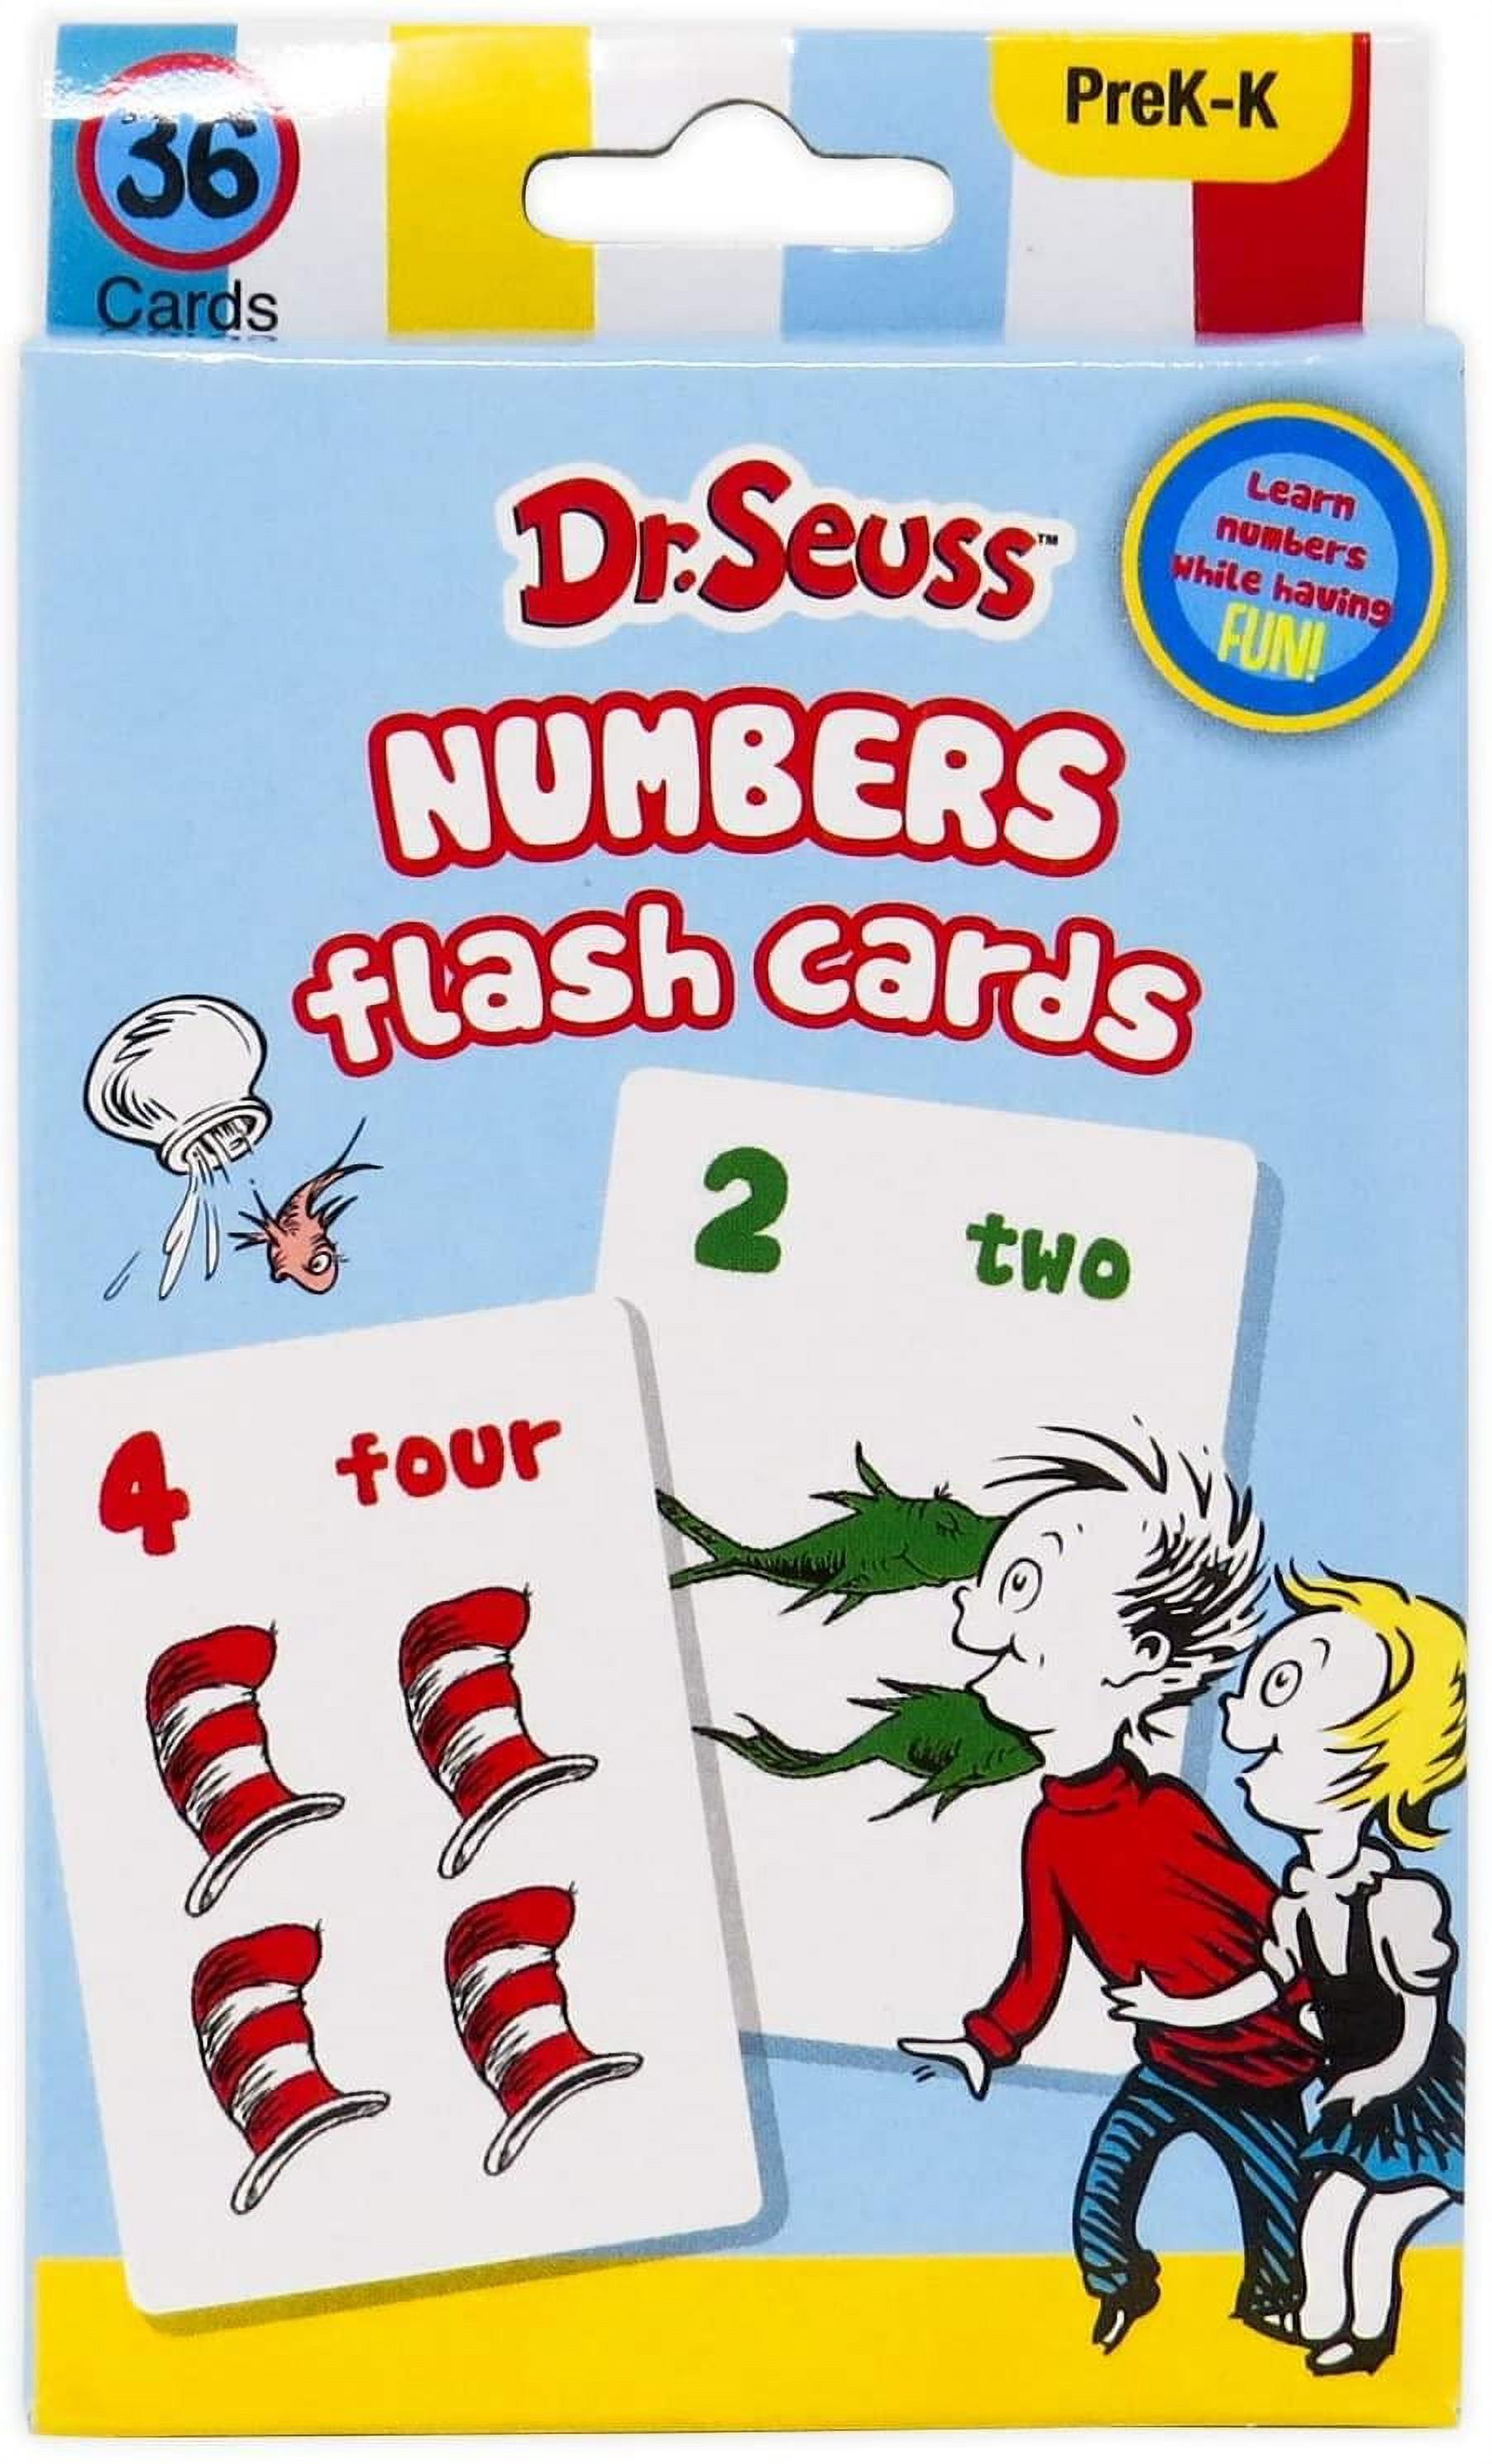 Dr. Seuss 4-in-1 Educational Flash Cards Value Pack - image 4 of 4